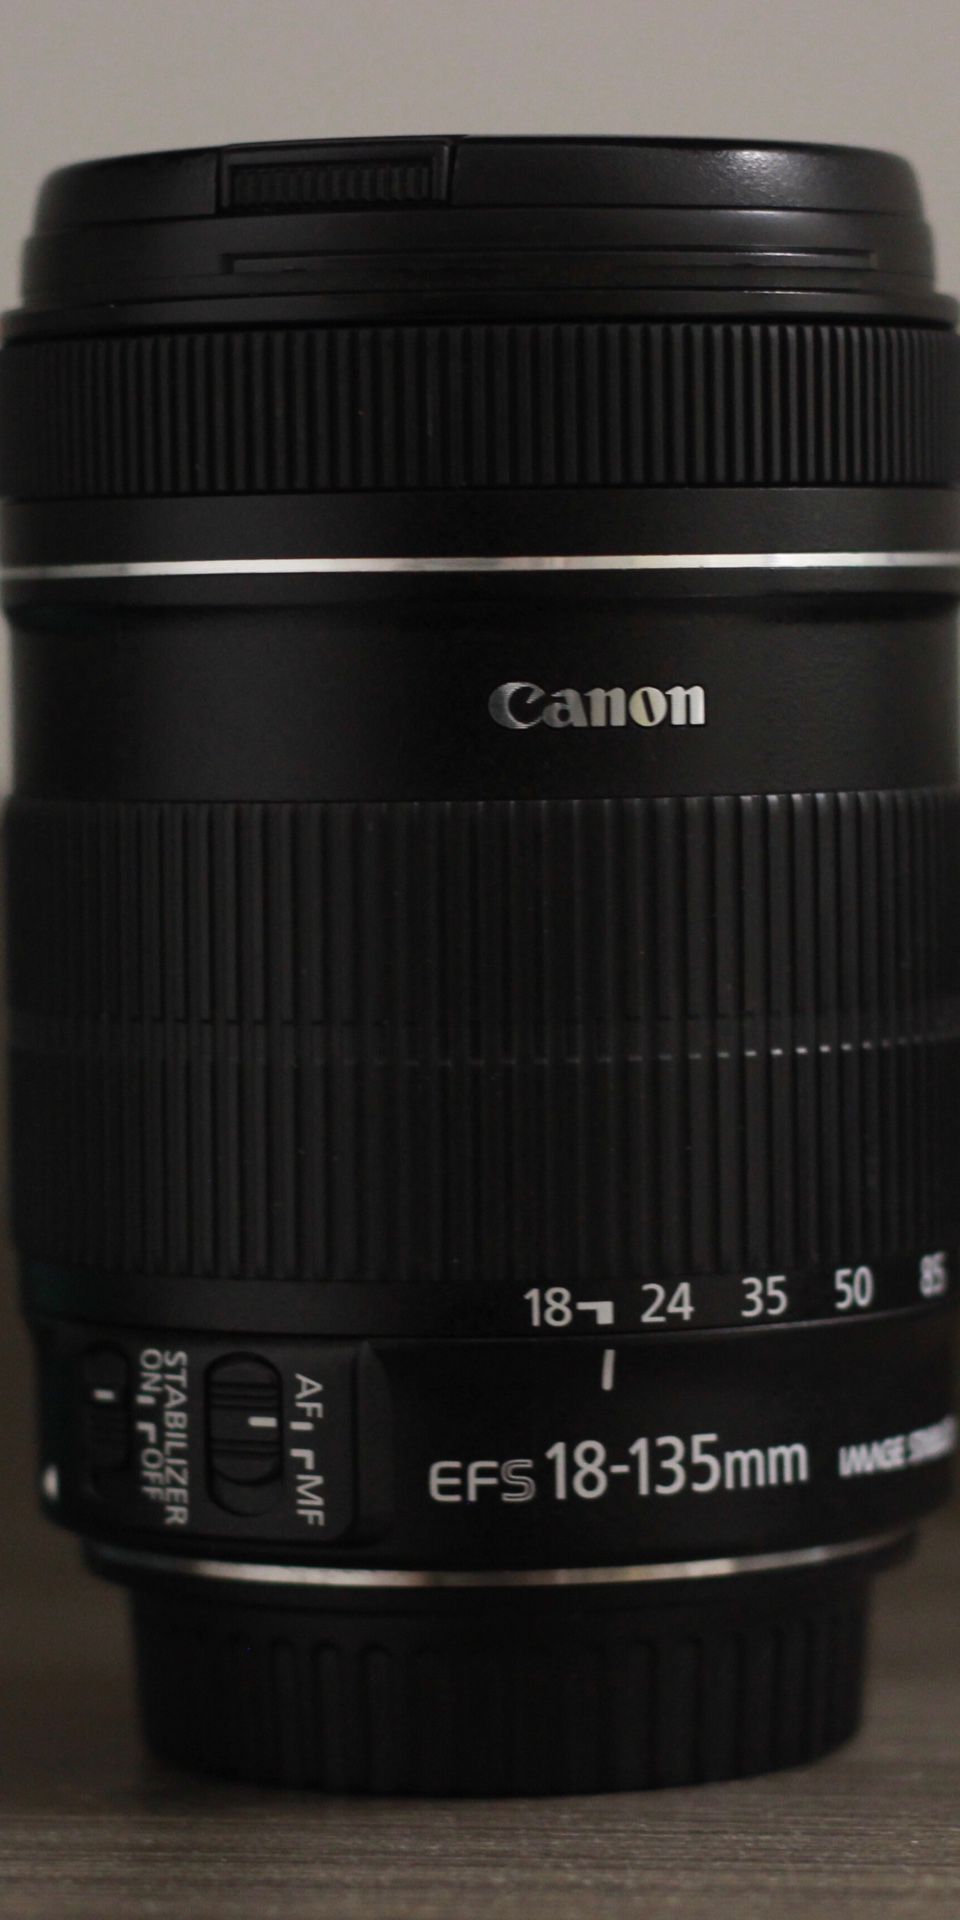 New Canon EF-S 18-135mm f/3.5-5.6 IS Lens